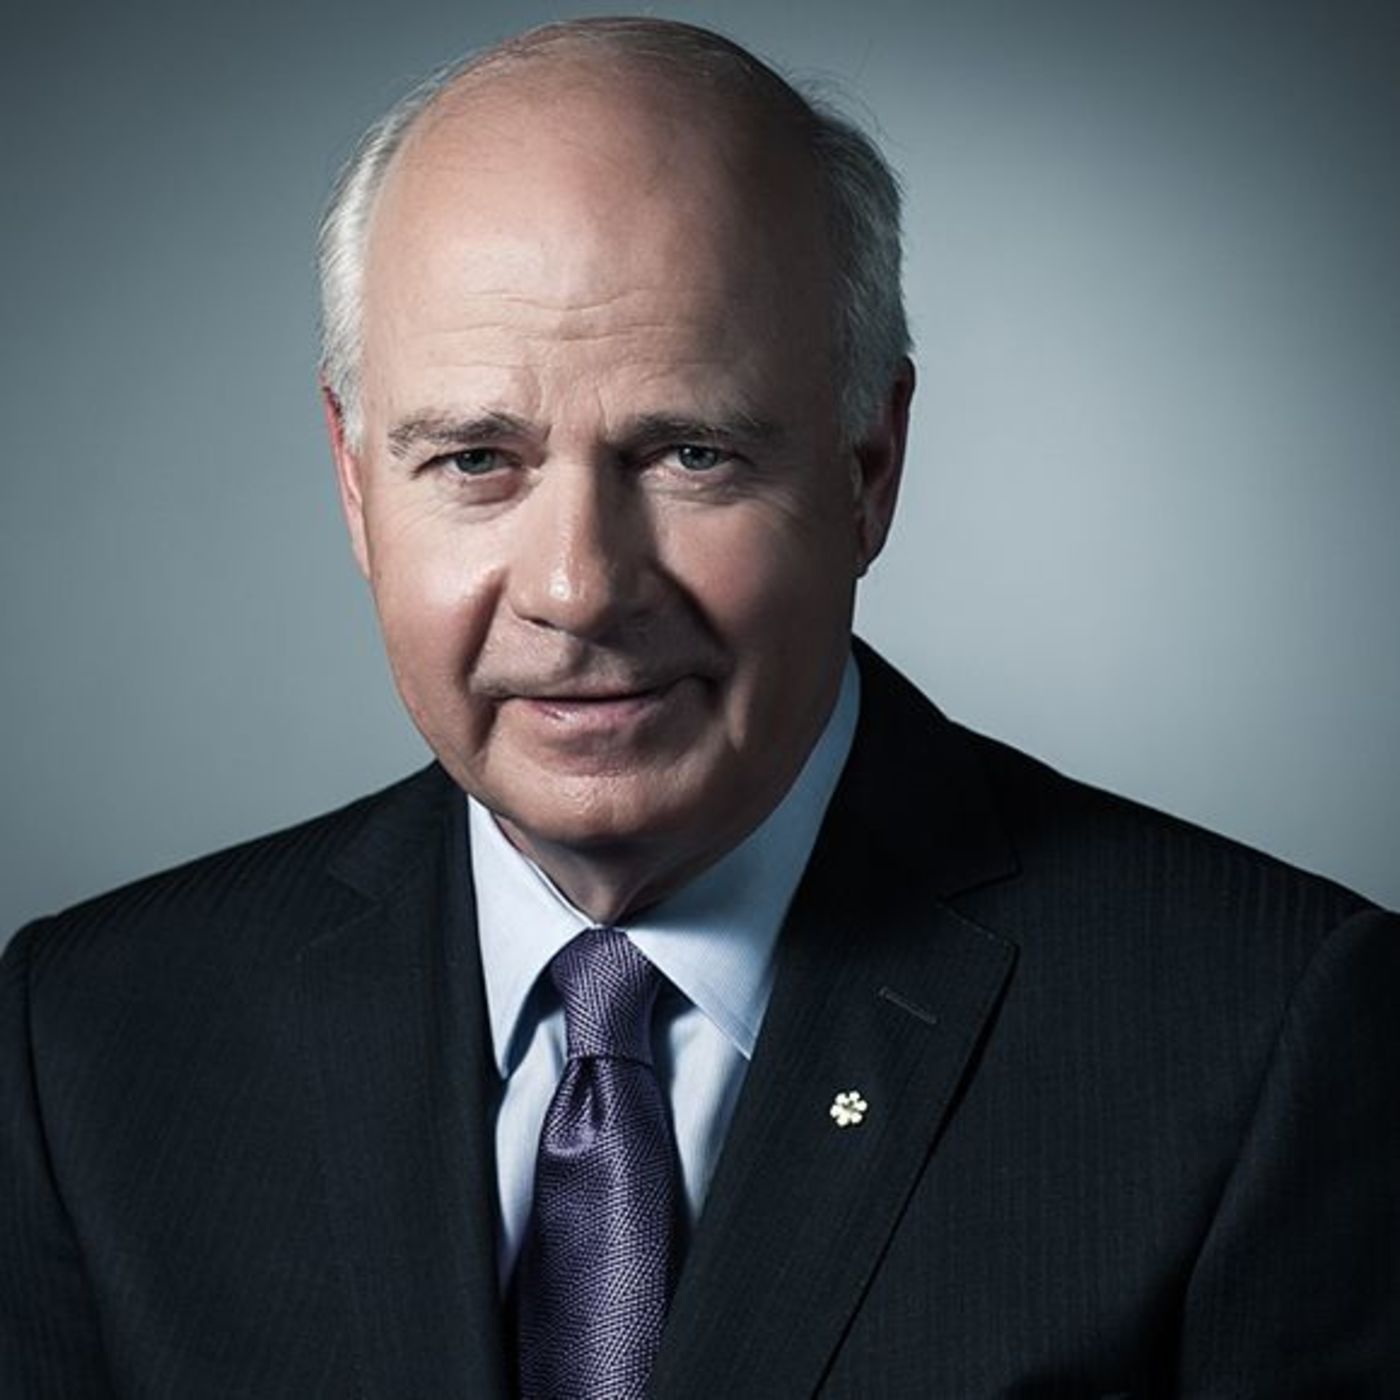 An i'view with Peter Mansbridge on his indie election podcast The Bridge